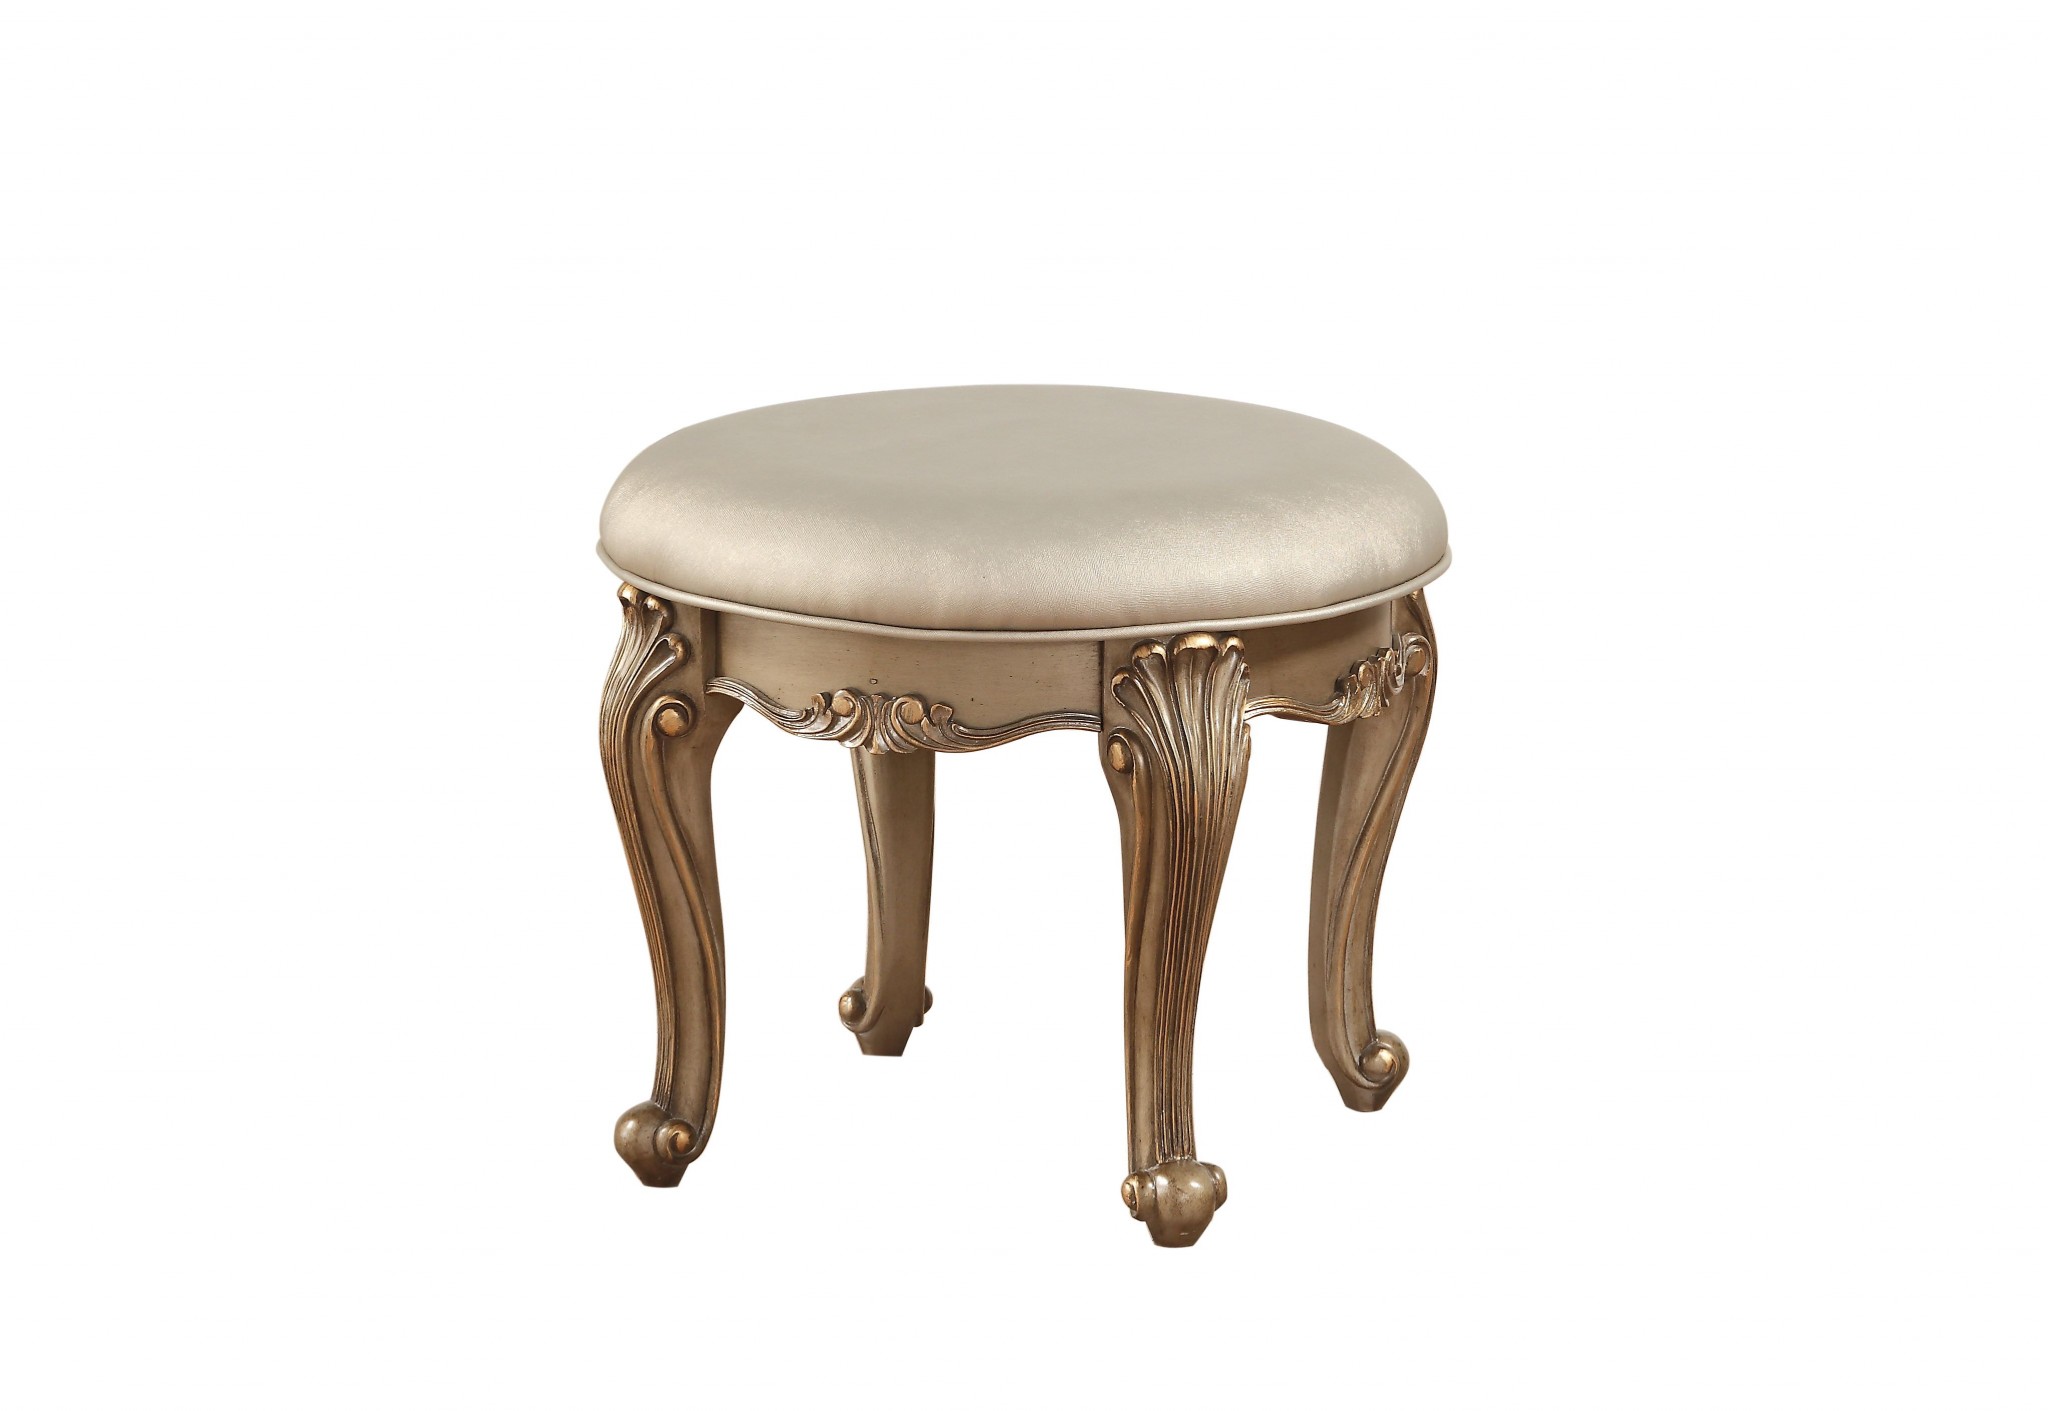 19" X 19" X 18" Champagne Faux Leather Vanity Stool